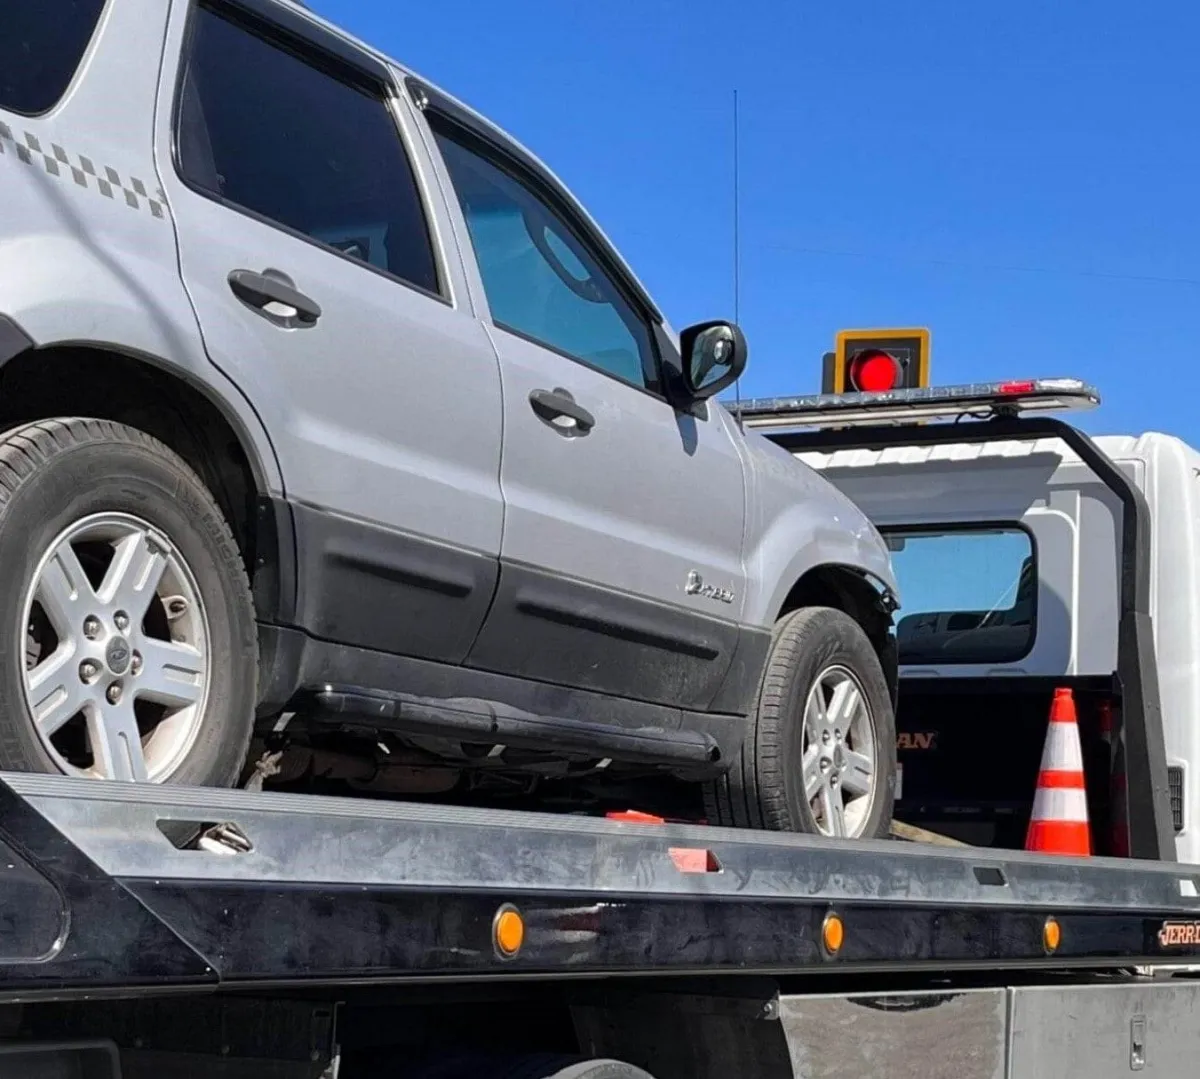 SUV in the back of a flatbed of a tow truck